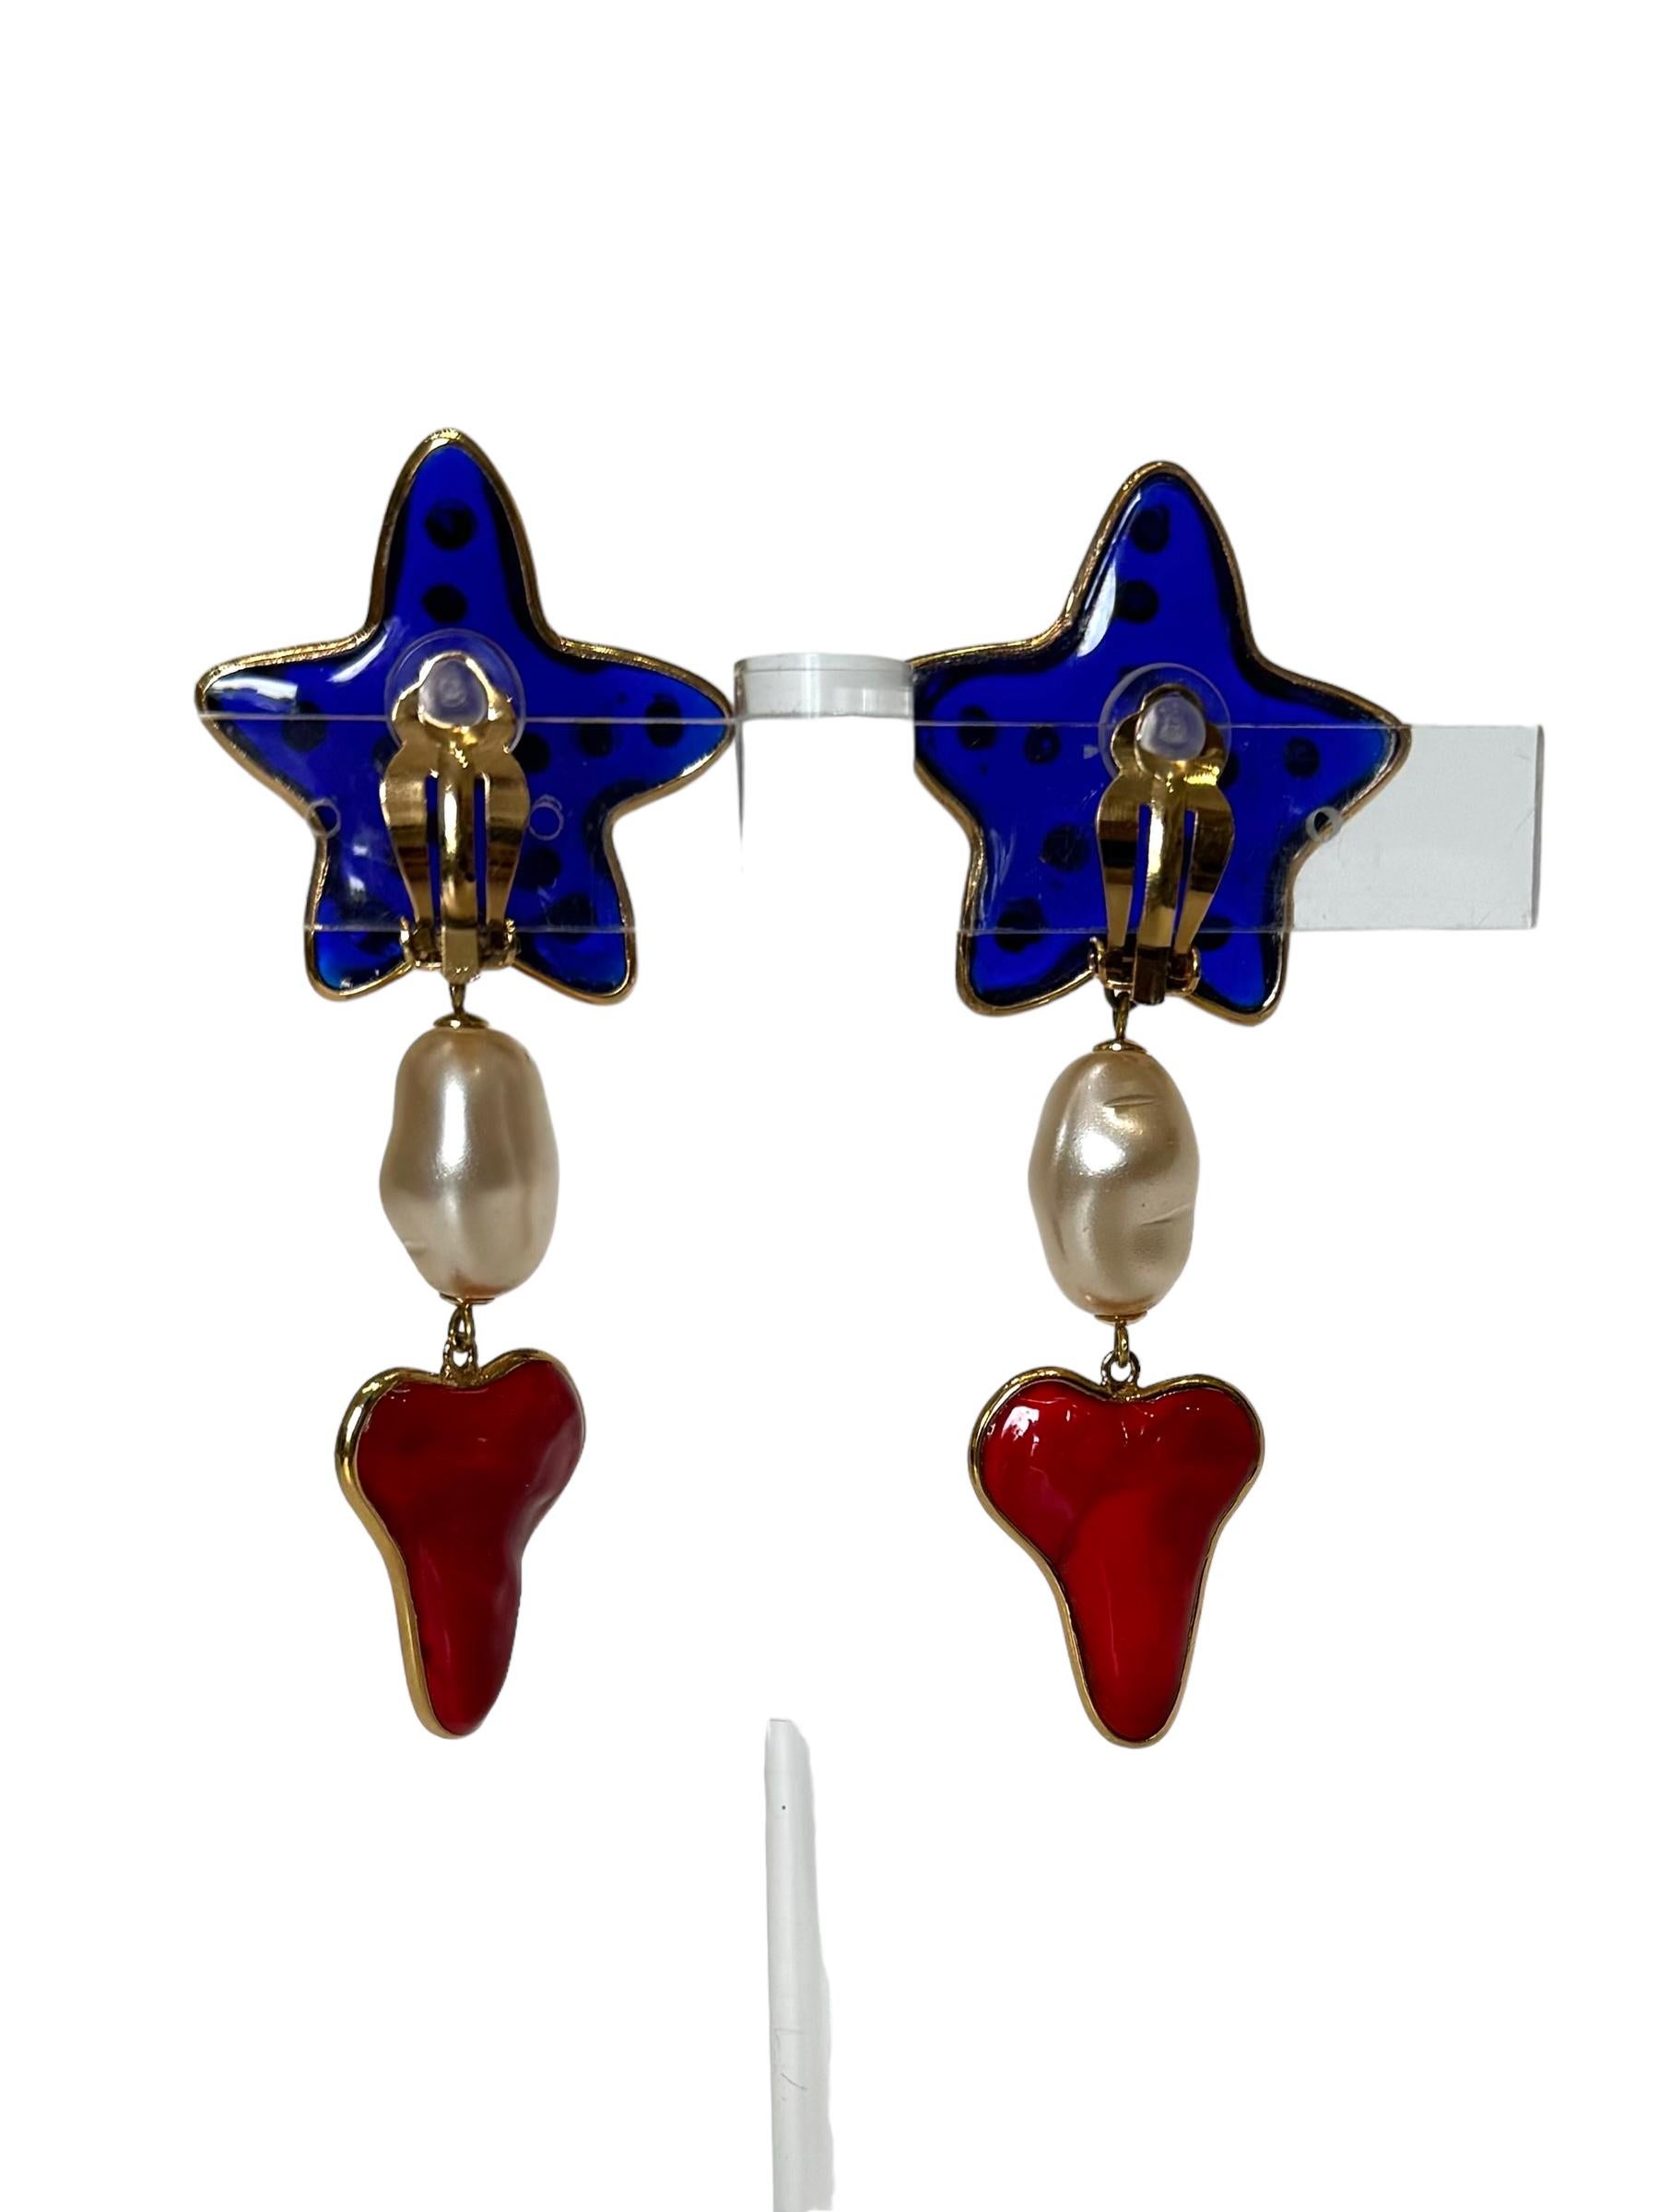 Sea Star and coral Statement Earrings with baroque pearls and crystals

Materials : poured glass, gold (24k) plated brass
Size: 9 X 4cm
Colours : Blue and Red
Handmade in our Parisian workshop
Gripoix jewels are handmade in our parisian